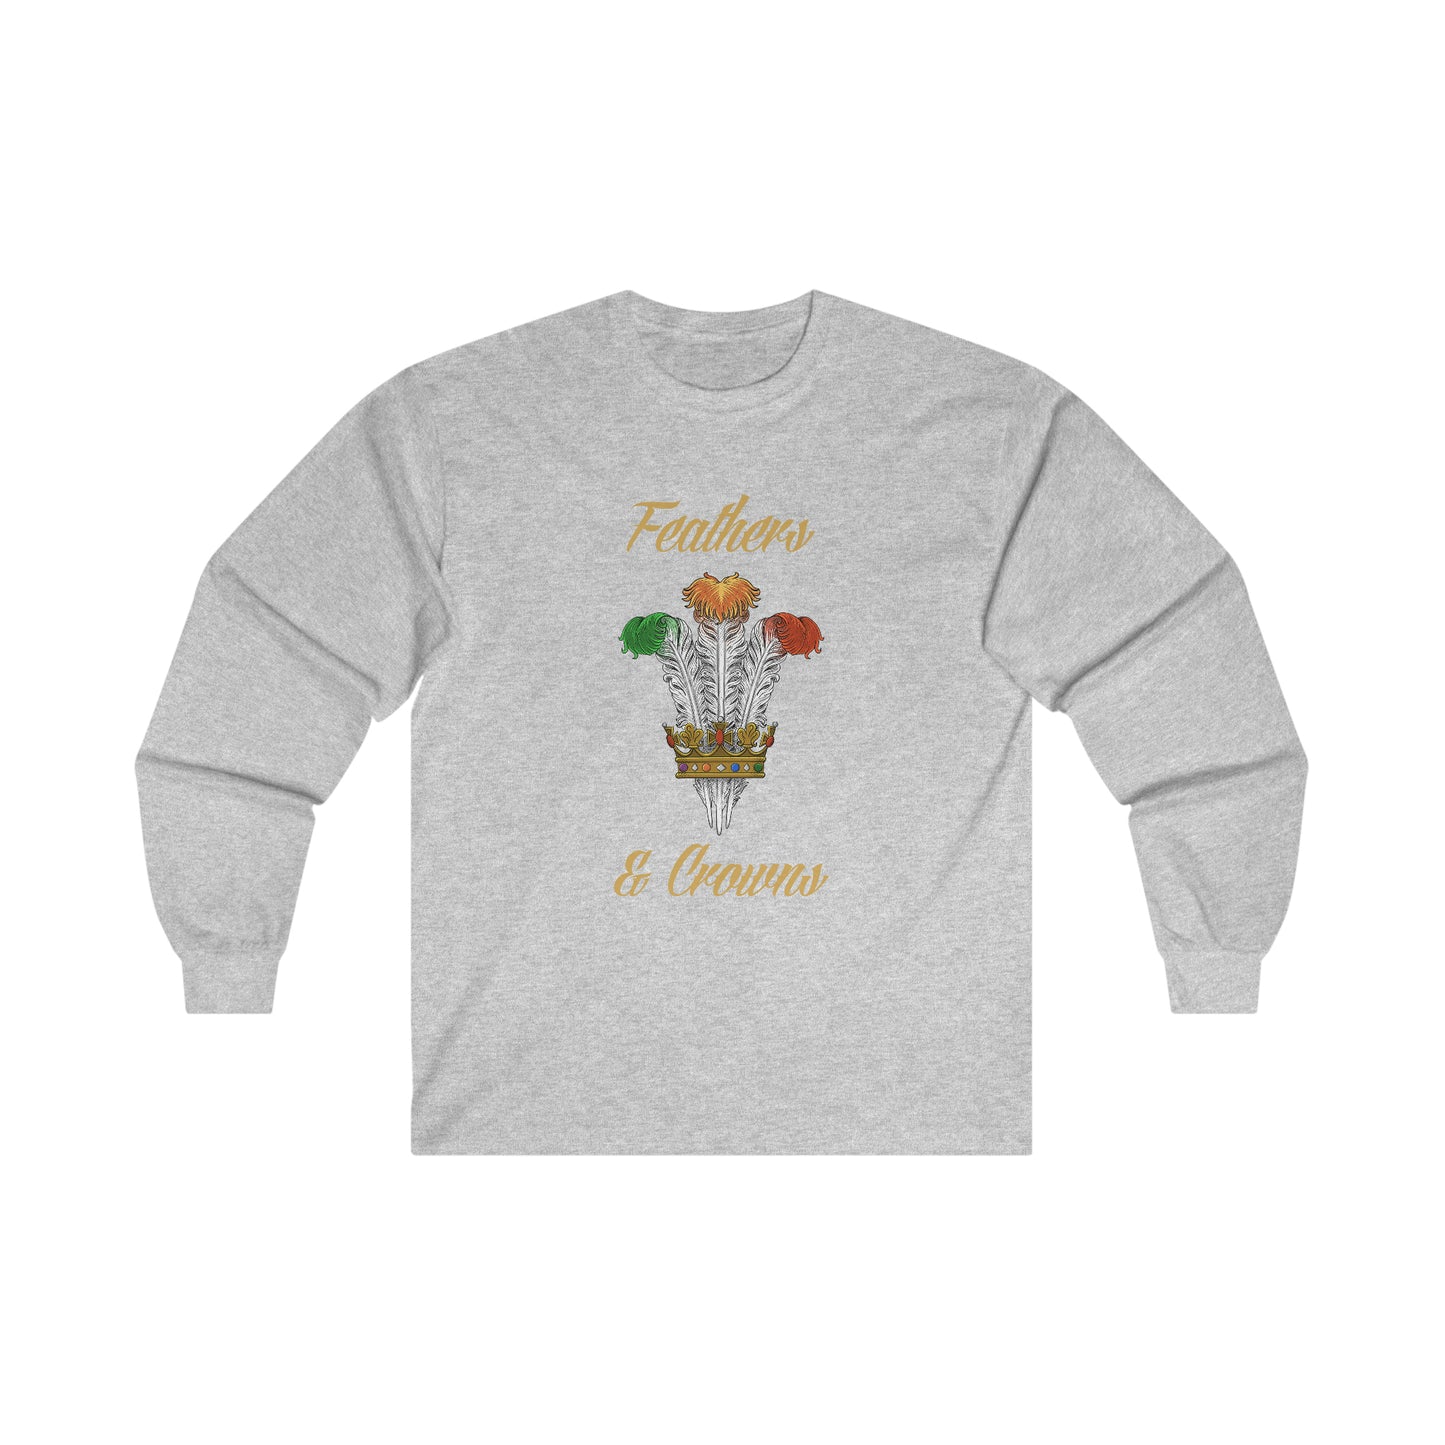 Feathers and Crowns Logo Long Sleeve Tee